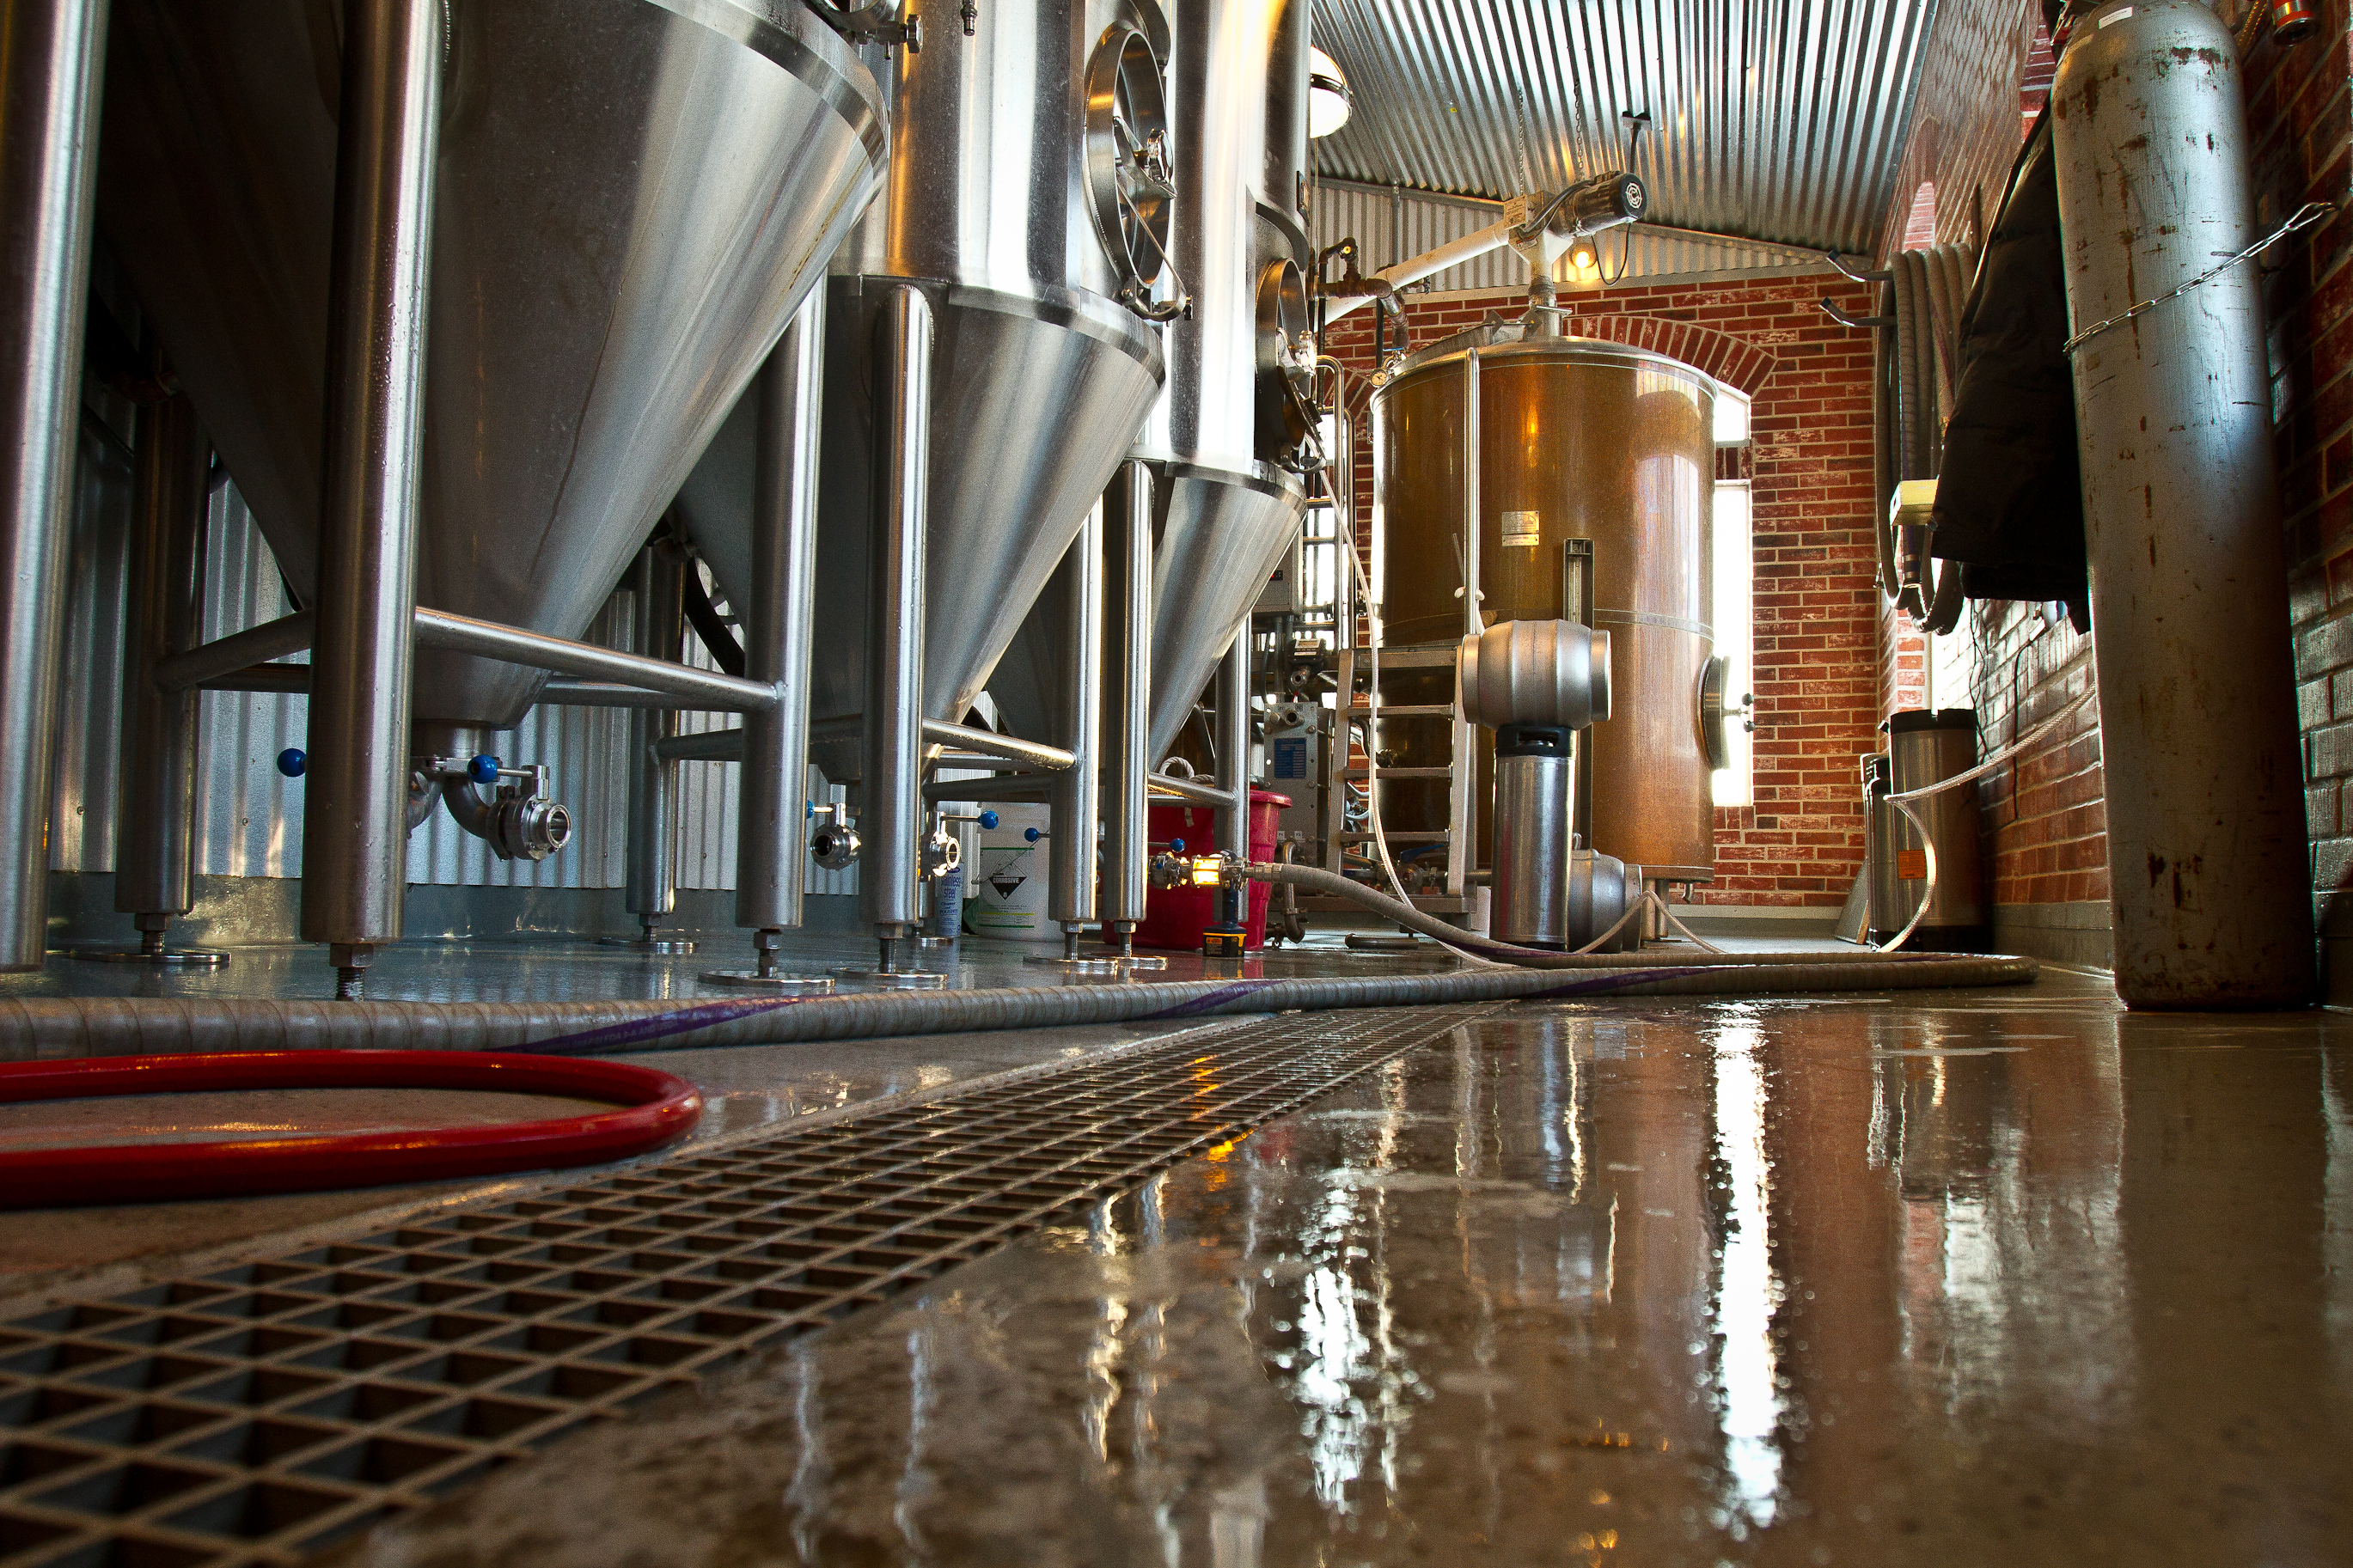 Brewery, Microbrewery, Brewpub. What's the Difference?